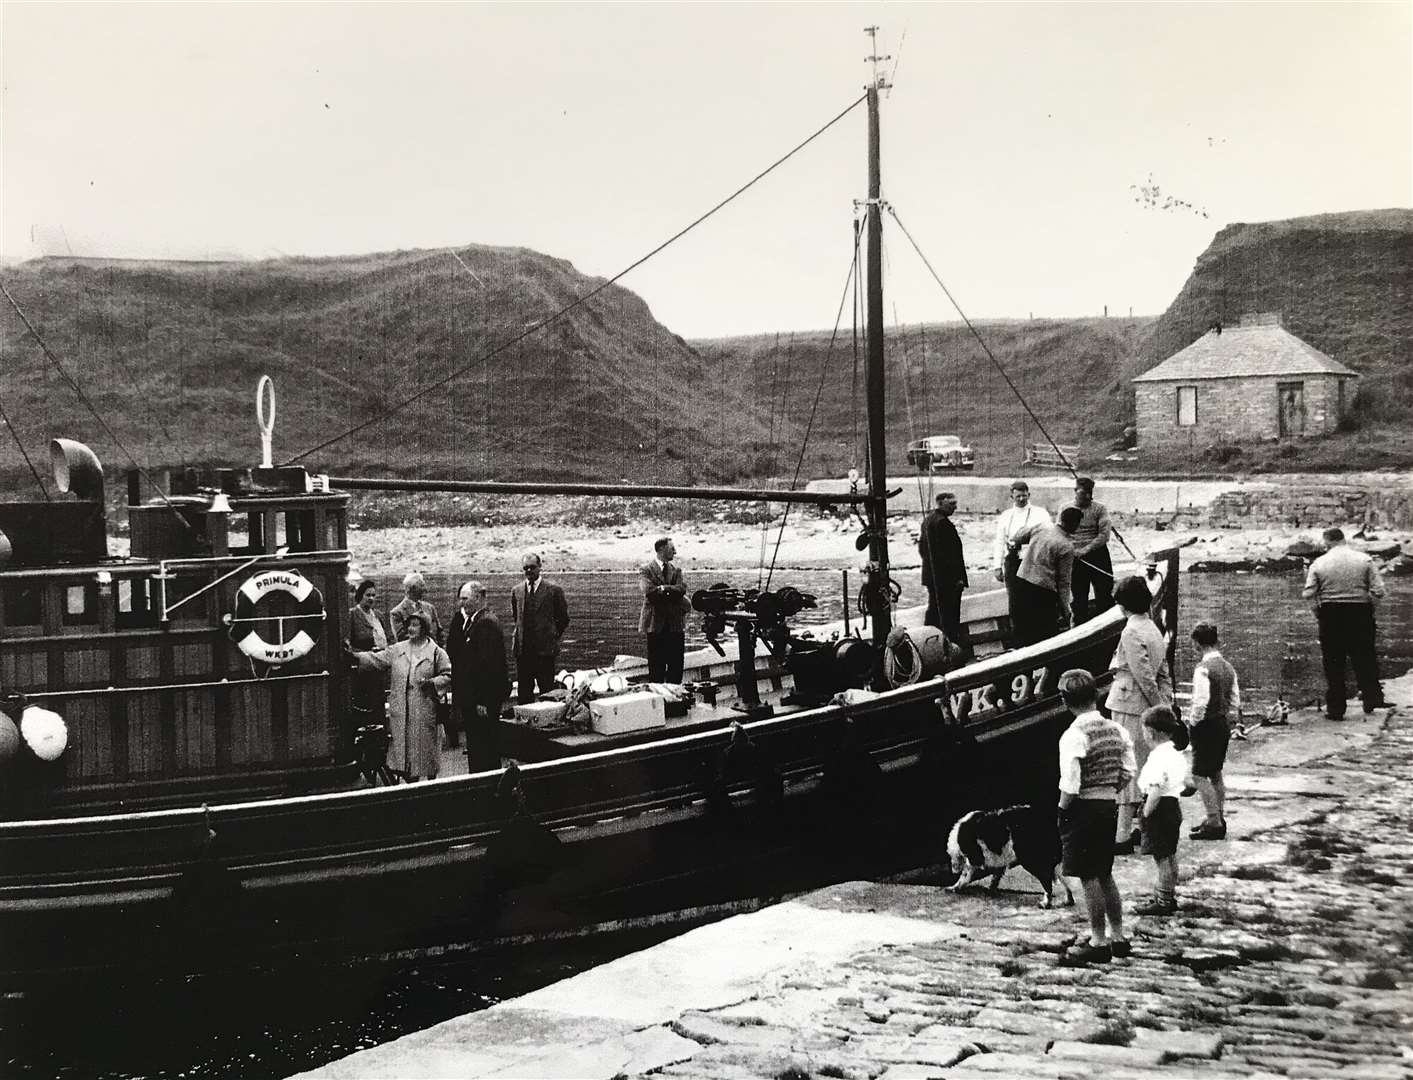 The Queen Mother sets out for Stroma along with all her picnic hampers on board the Primula from Harrow harbour, just down from her home at the Castle of Mey. Pictured with the Queen Mother (from left) are Commander and Lady Vyner, Thurso provost John Sinclair, two security officers, Malcolm Simpson, Eric Shaw, Billy (Borax) Mackay (back to camera), Alex Thompson and skipper Angus Macintosh on the quayside.